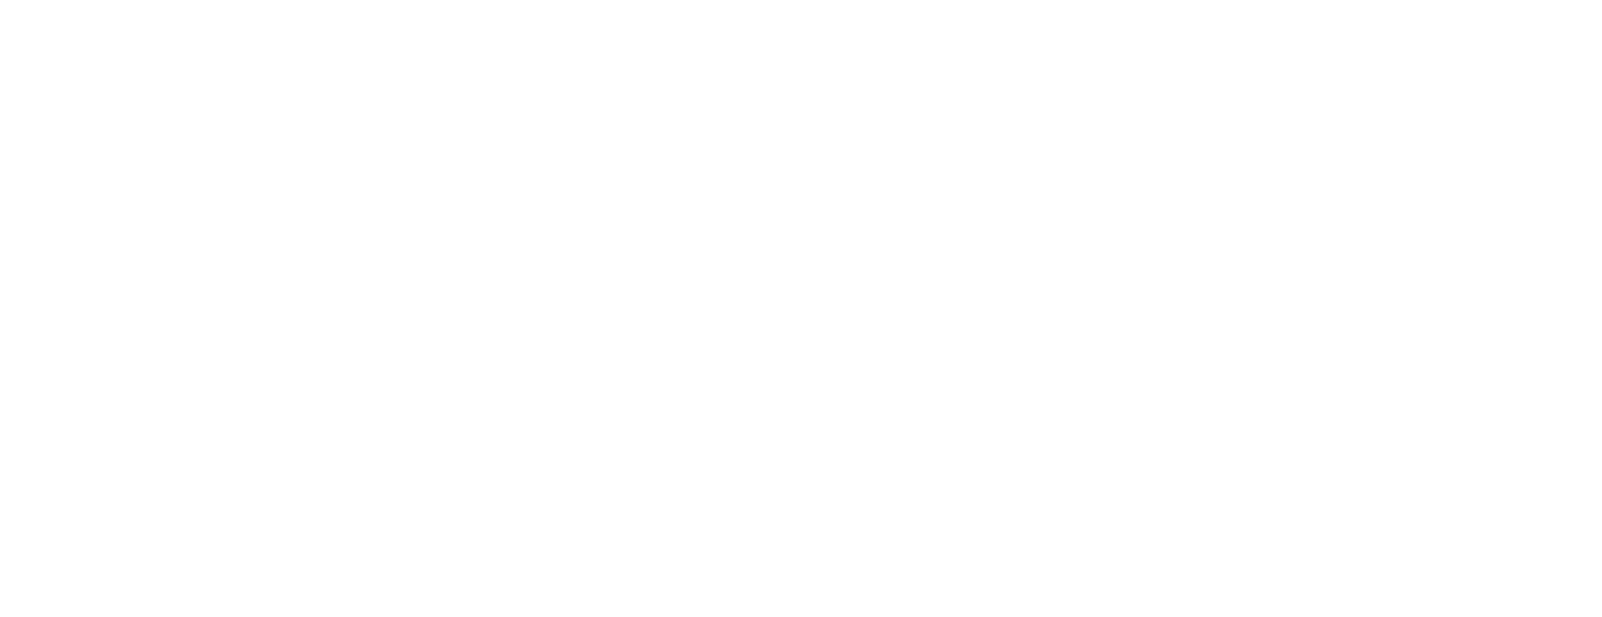 World Association of Zoos and Aquariums